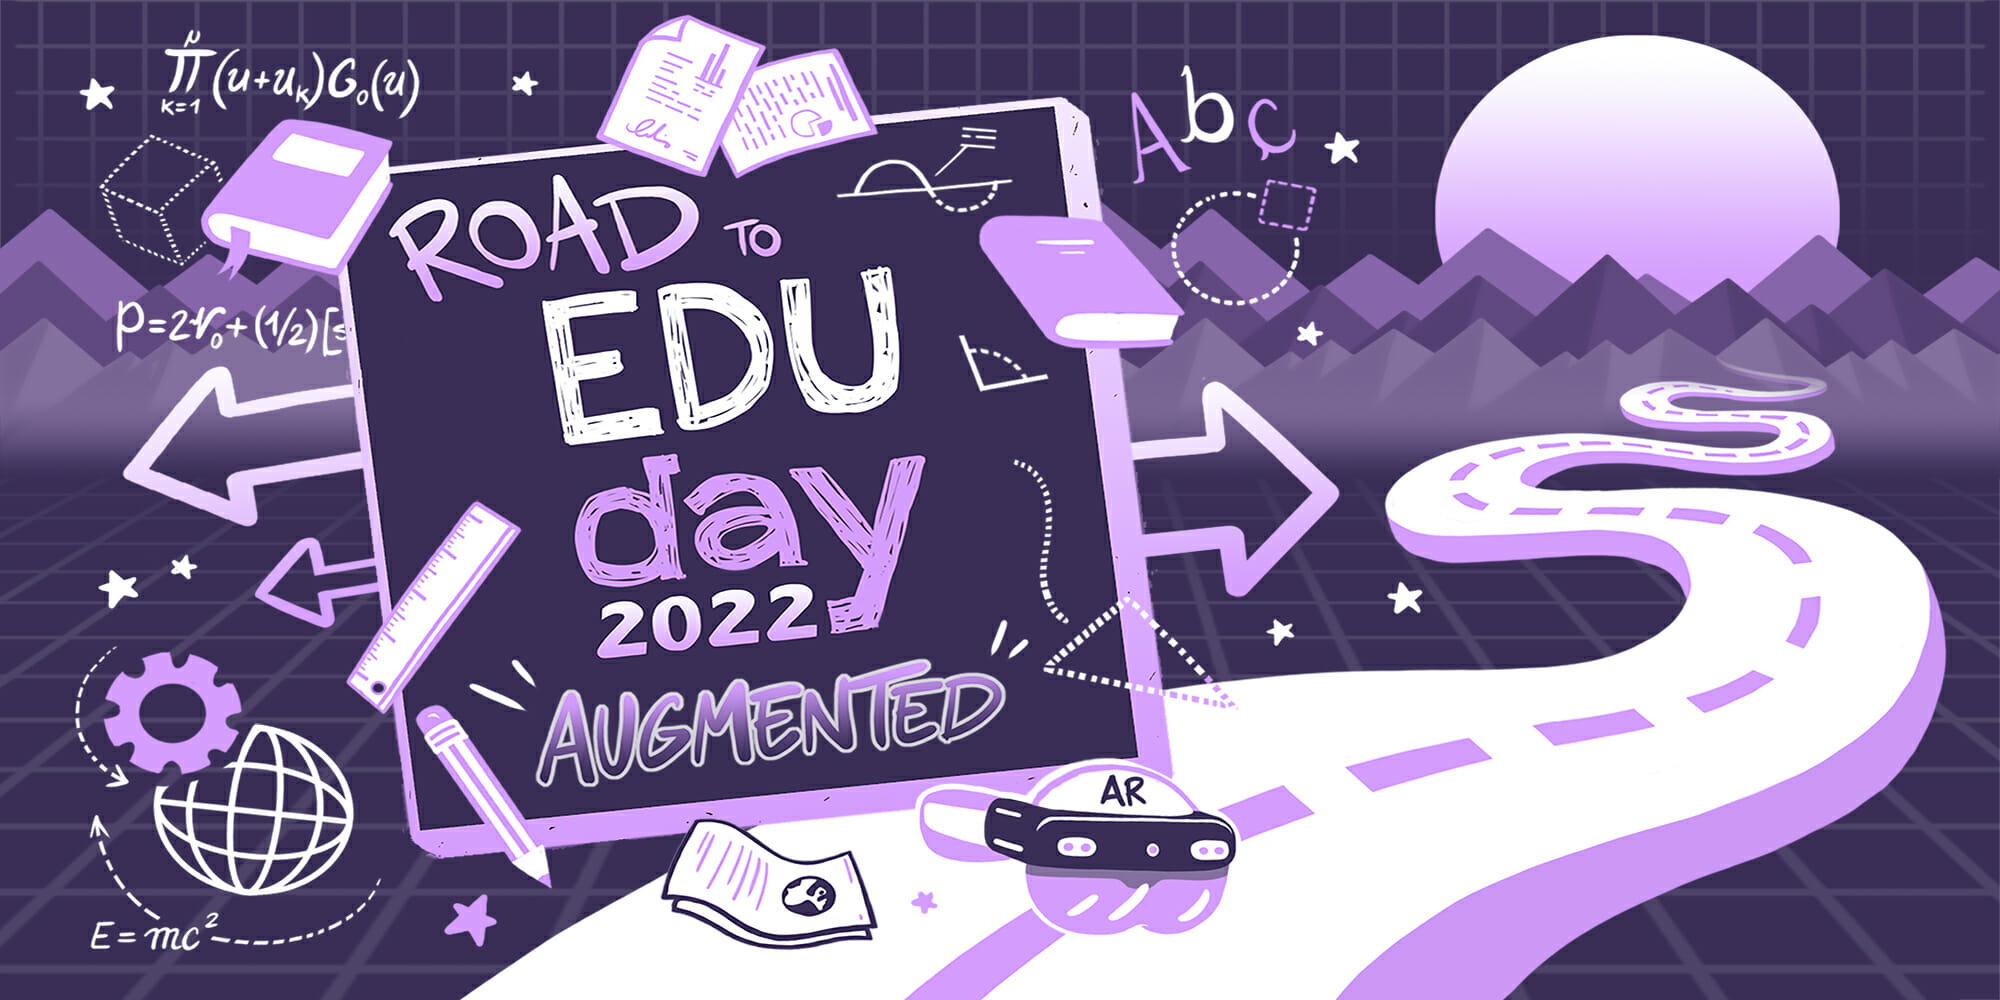 Road to EDU Day